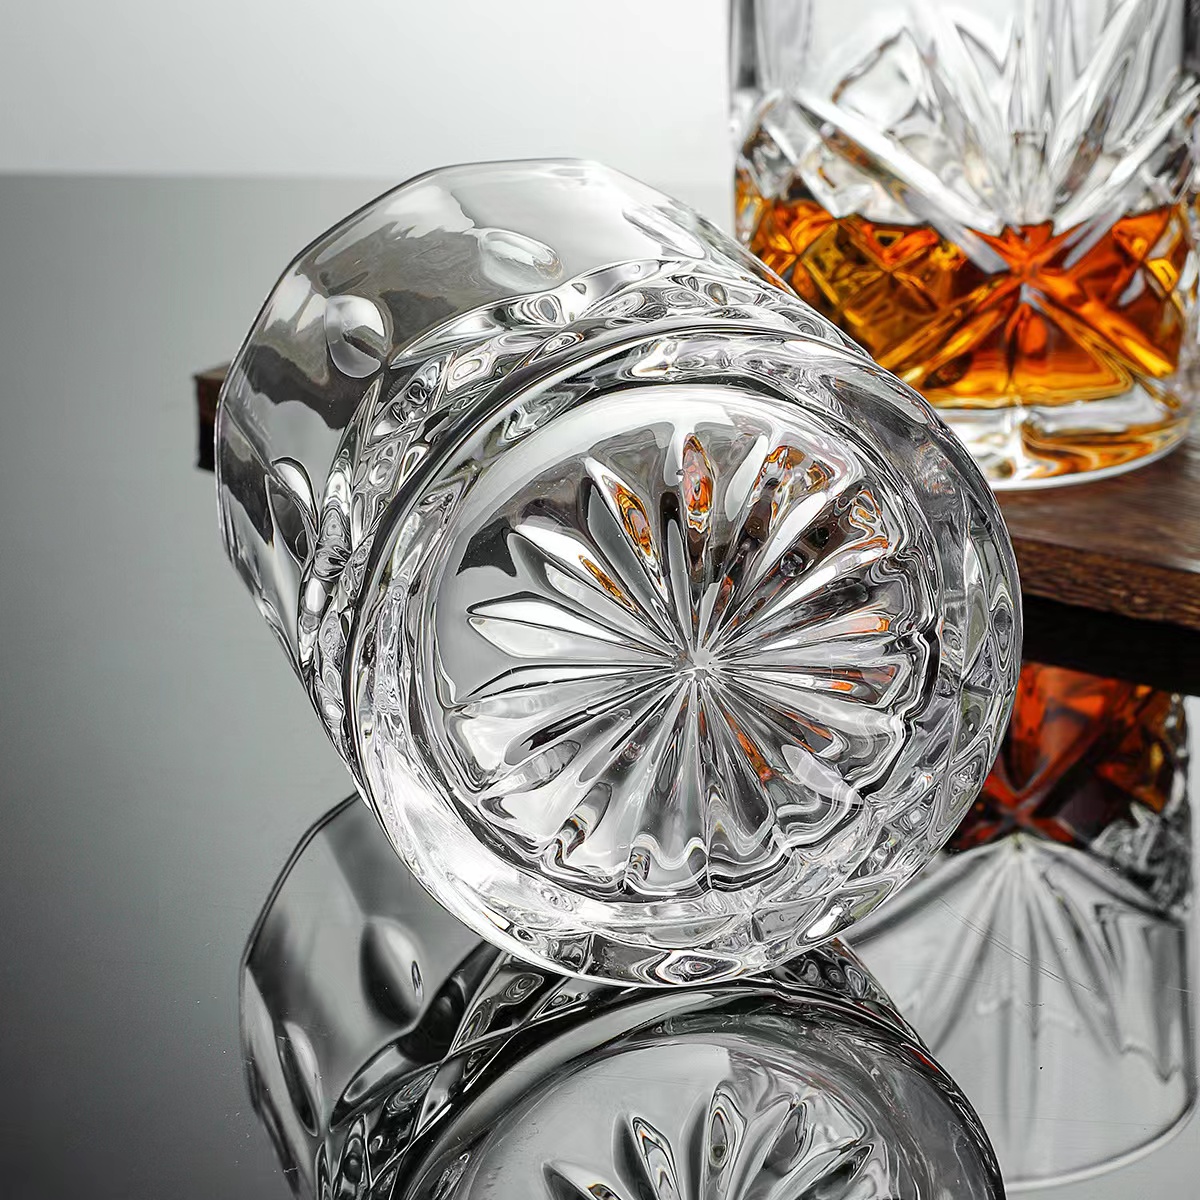 Old Fashioned Whiskey Glasses For Scotch, Bourbon, Liquor04 - 副本